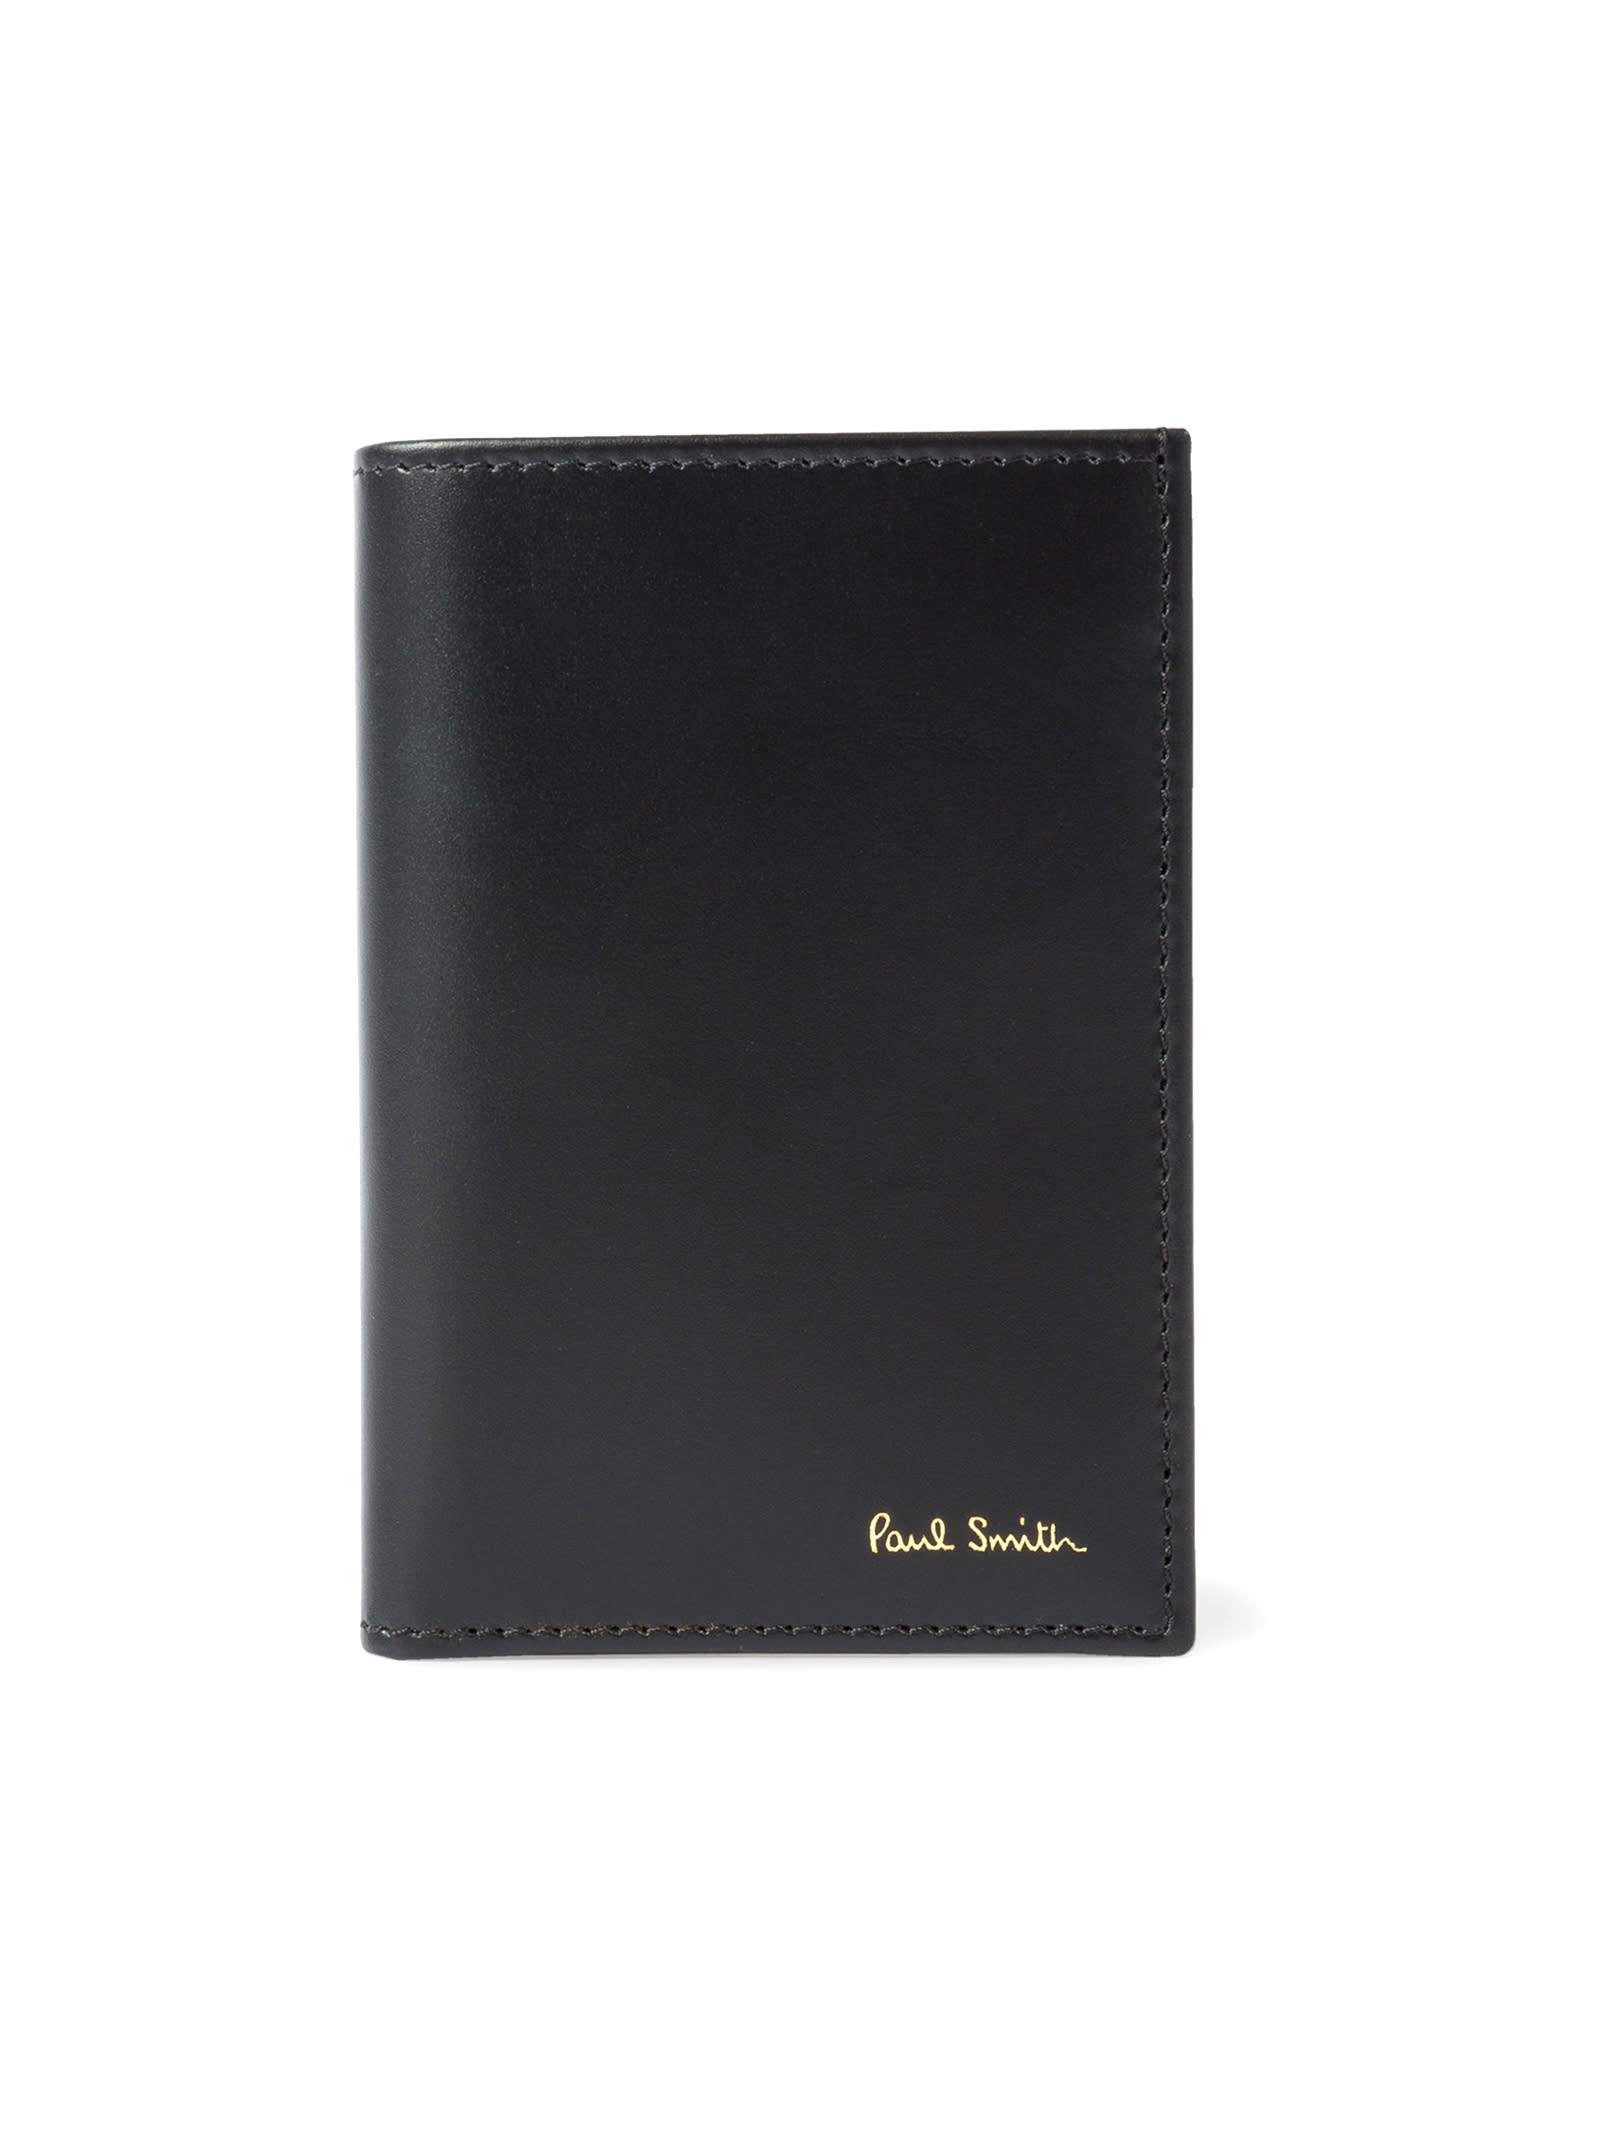 Paul Smith Wallet For Credit Cards